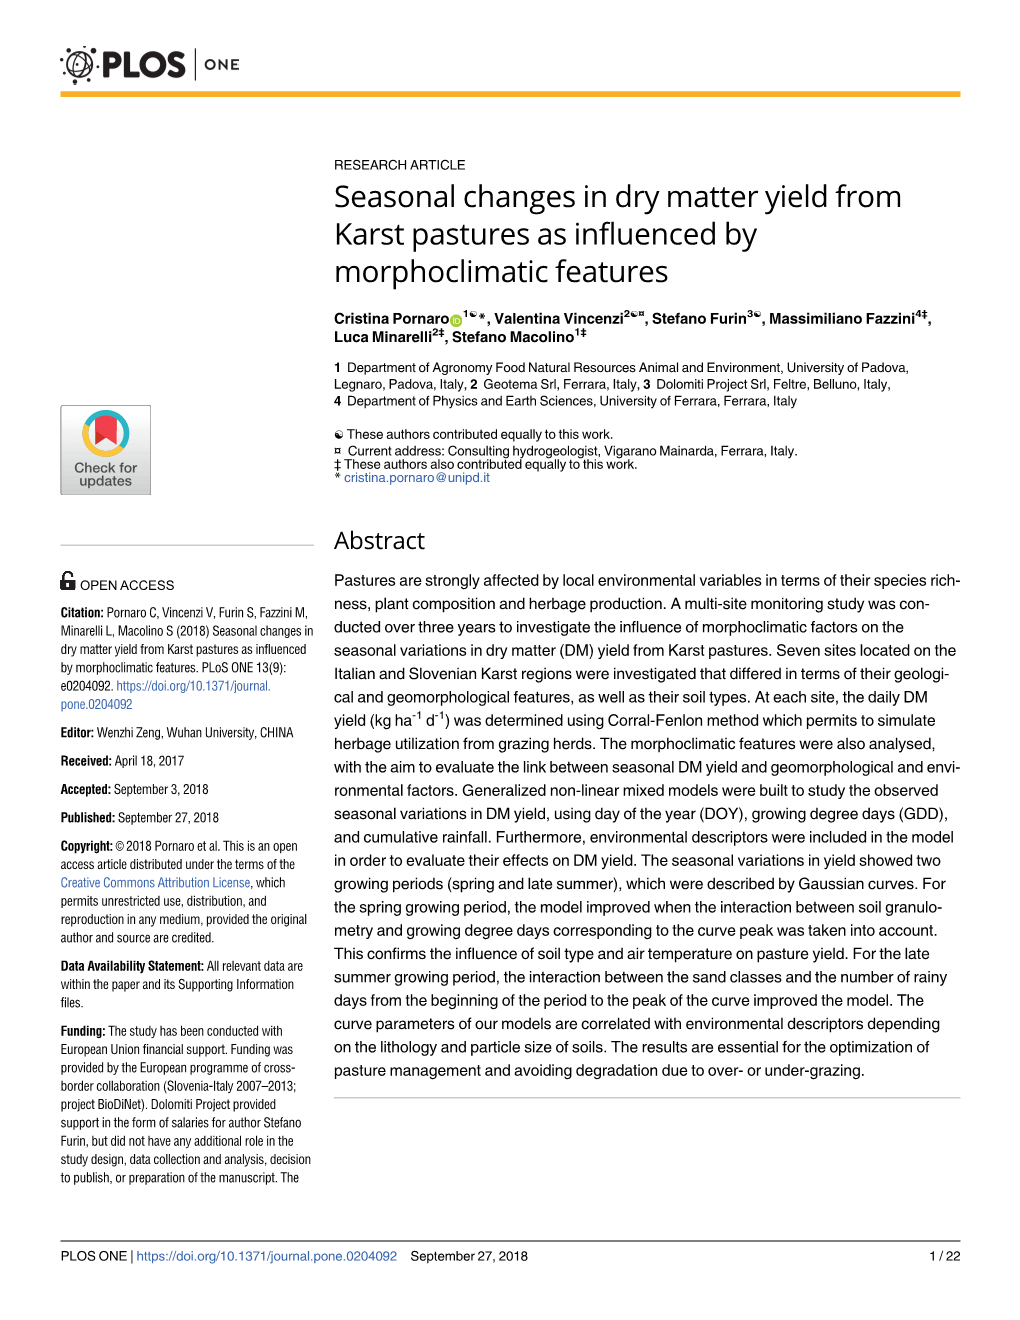 Seasonal Changes in Dry Matter Yield from Karst Pastures As Influenced by Morphoclimatic Features